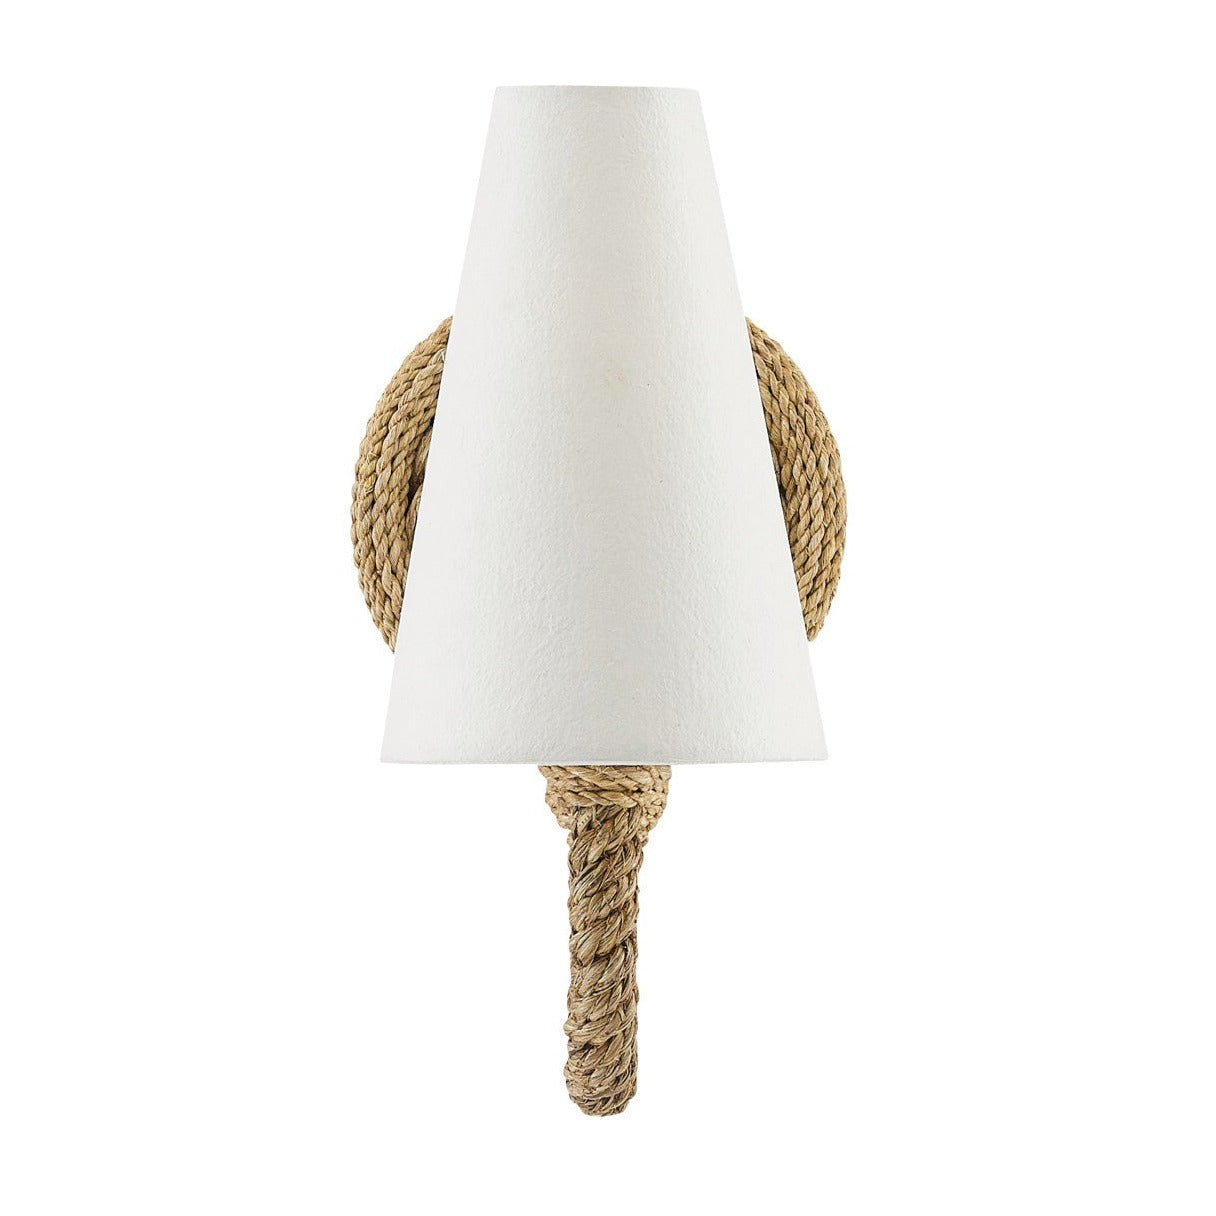 Merchant Rope Candlelit Wall Sconce